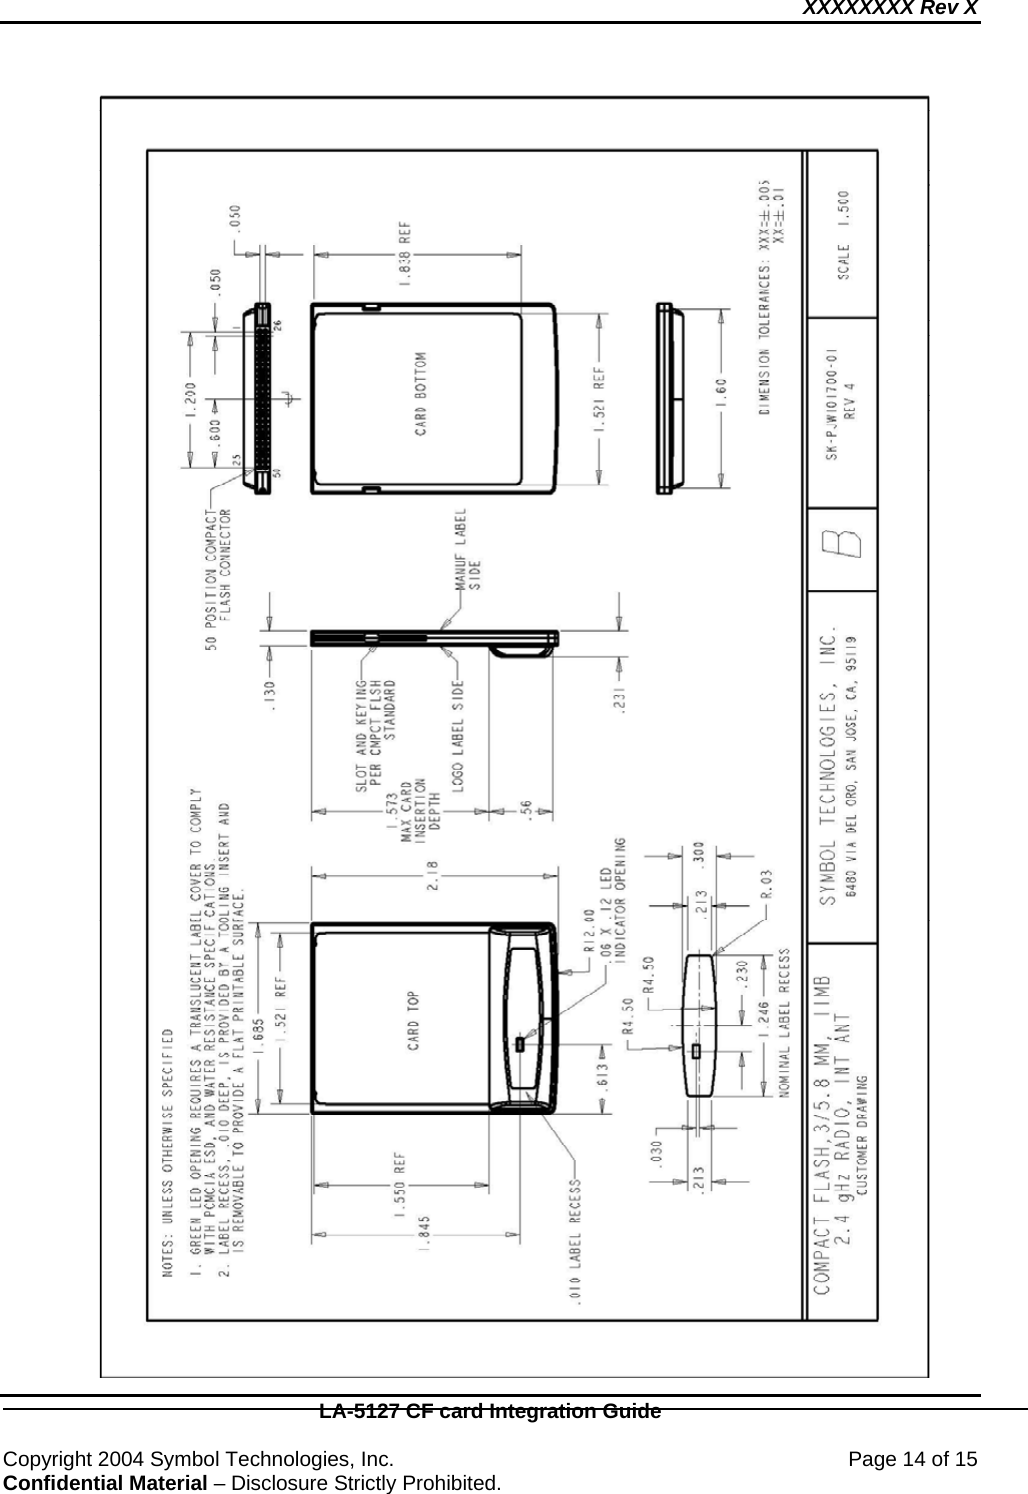 XXXXXXXX Rev X    LA-5127 CF card Integration Guide  Copyright 2004 Symbol Technologies, Inc.    Page 14 of 15 Confidential Material – Disclosure Strictly Prohibited.  